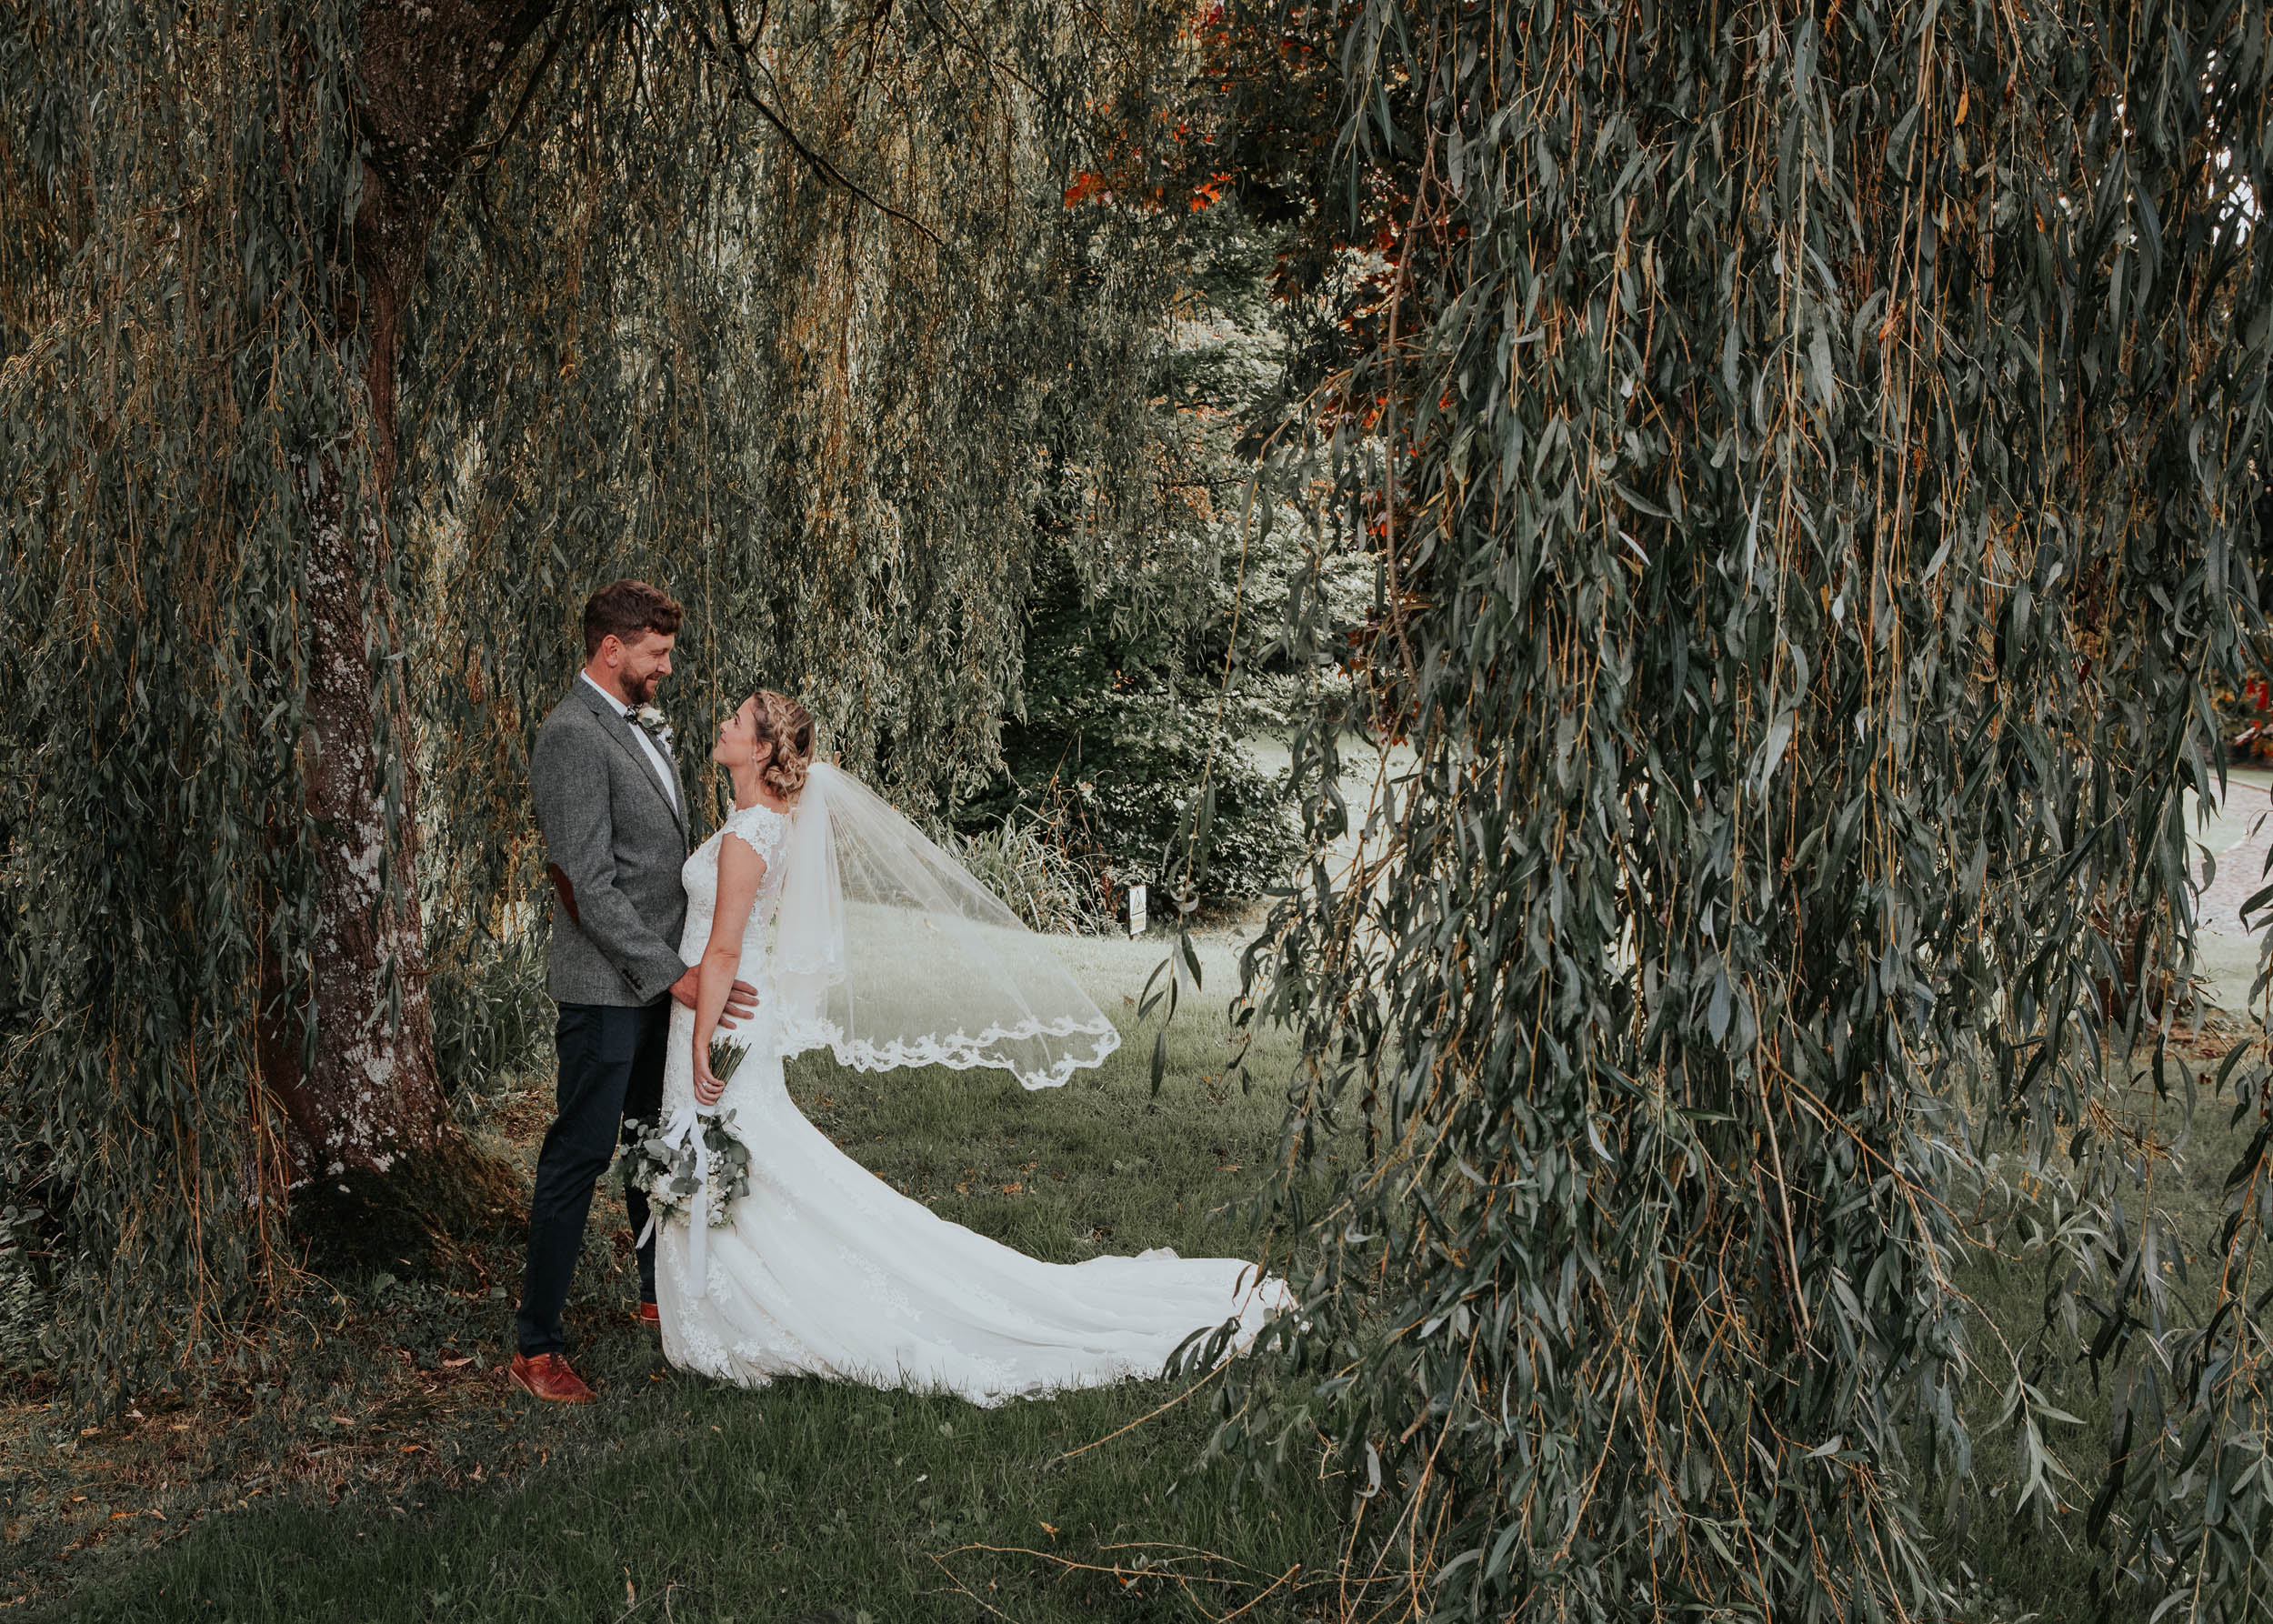 Bride and groom surrounded by mature willow trees